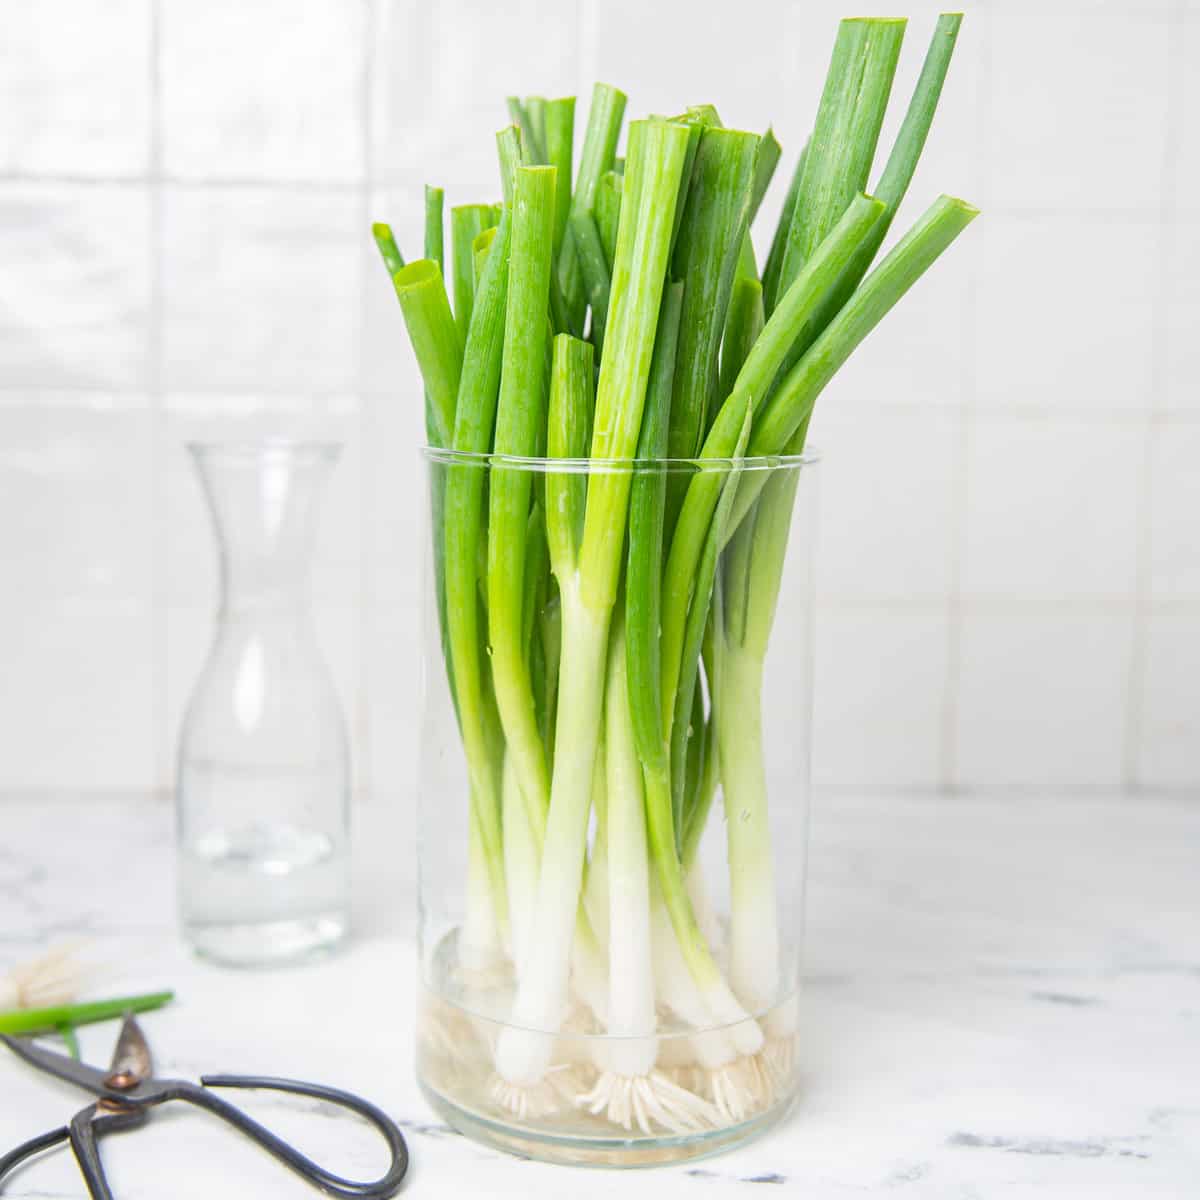 Scallions in a jar with wate and black scissors on a kitchen counter.